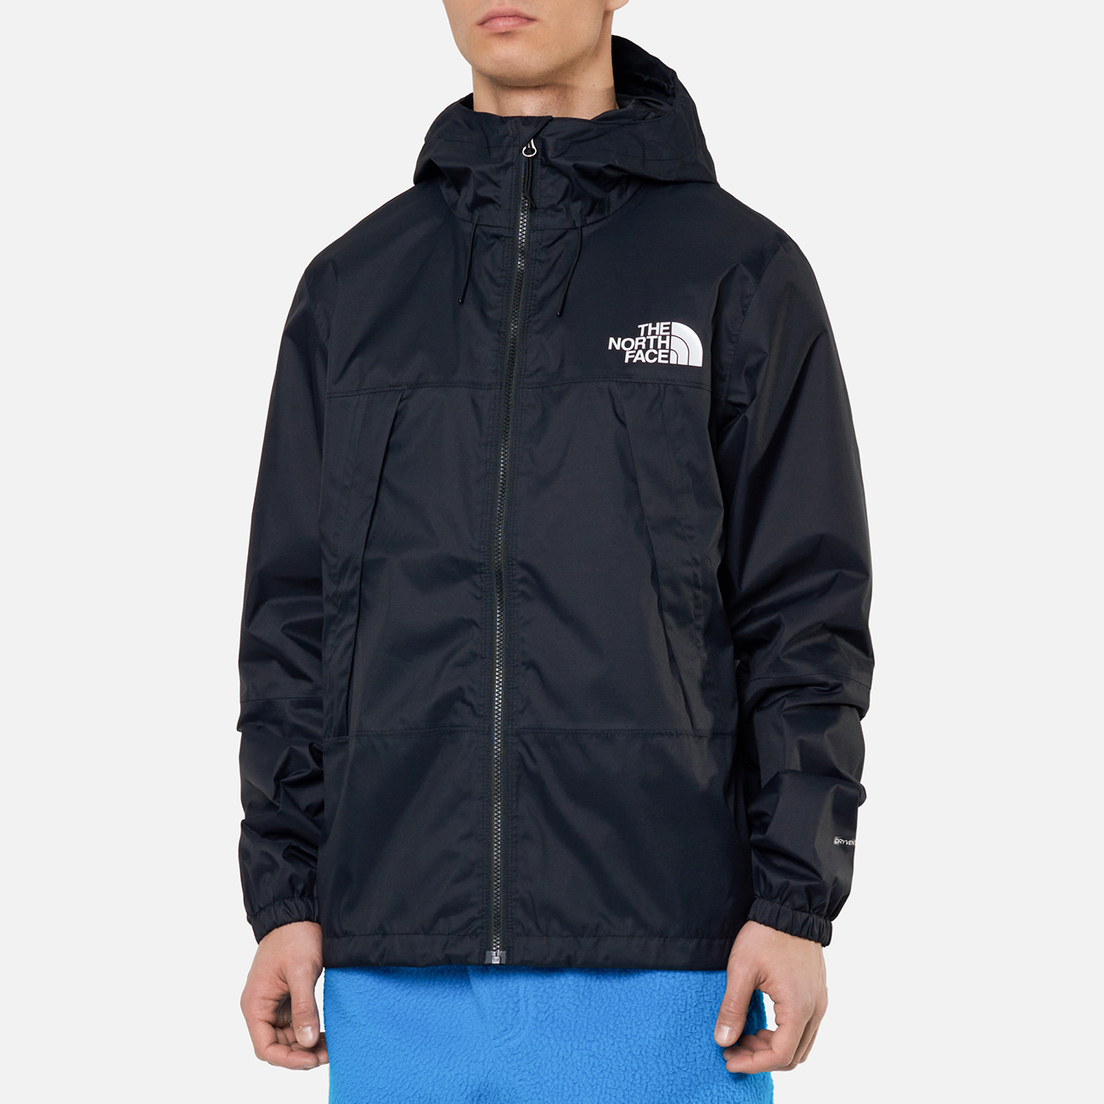 The North Face 1990 Mountain Quest 